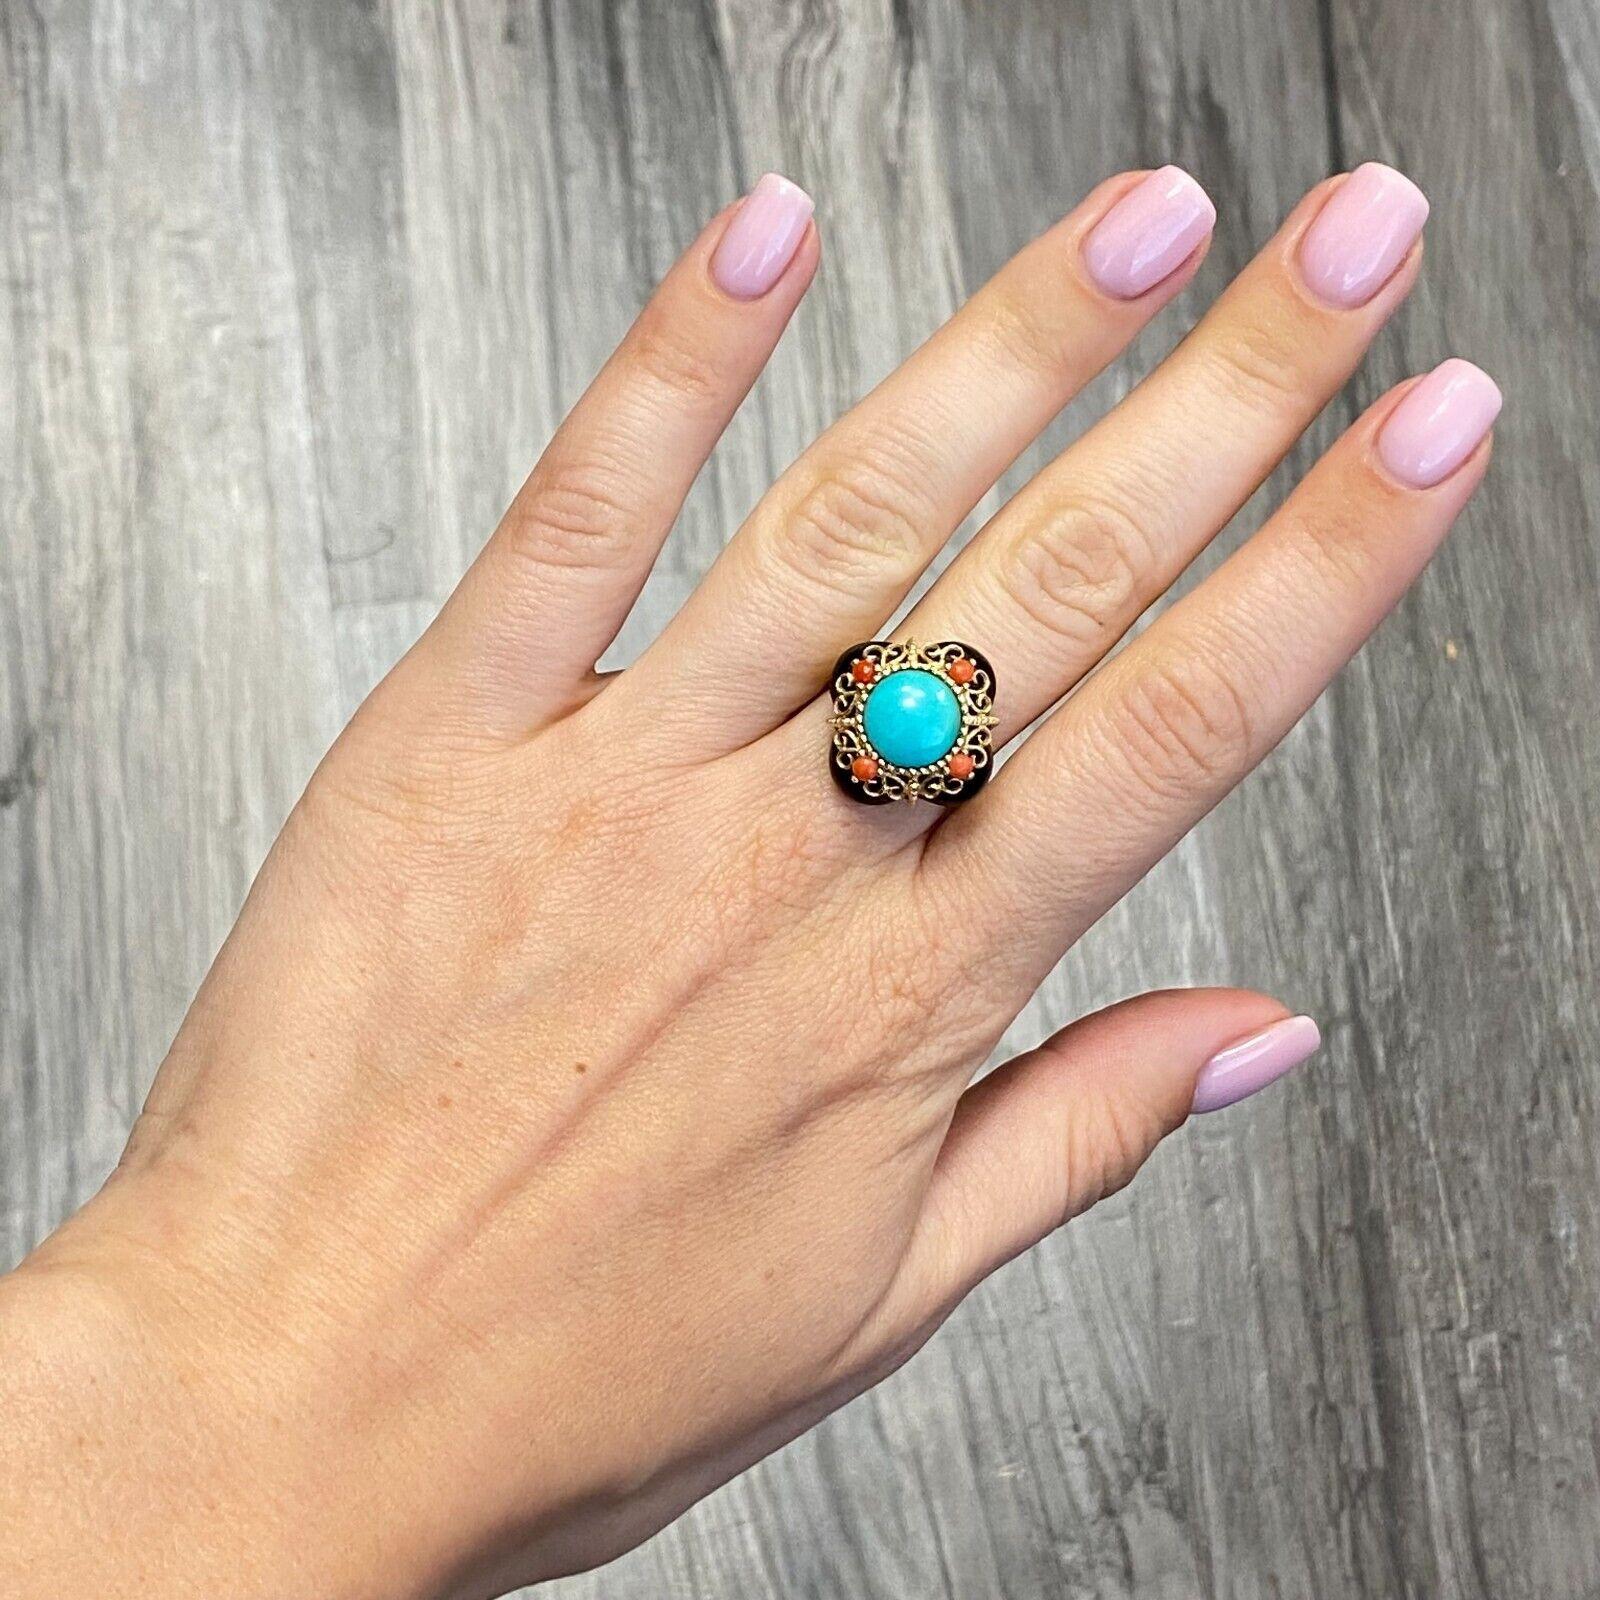 Specifications:
    main stone:  Turquoise 
    SIDE diamonds: ONYX, CORAL
    brand: UNBRANDED
    metal: 14K GOLD
    type: ring
    weight: 6.2 gr
    size: 6.75 US
    hallmark: 14K 

